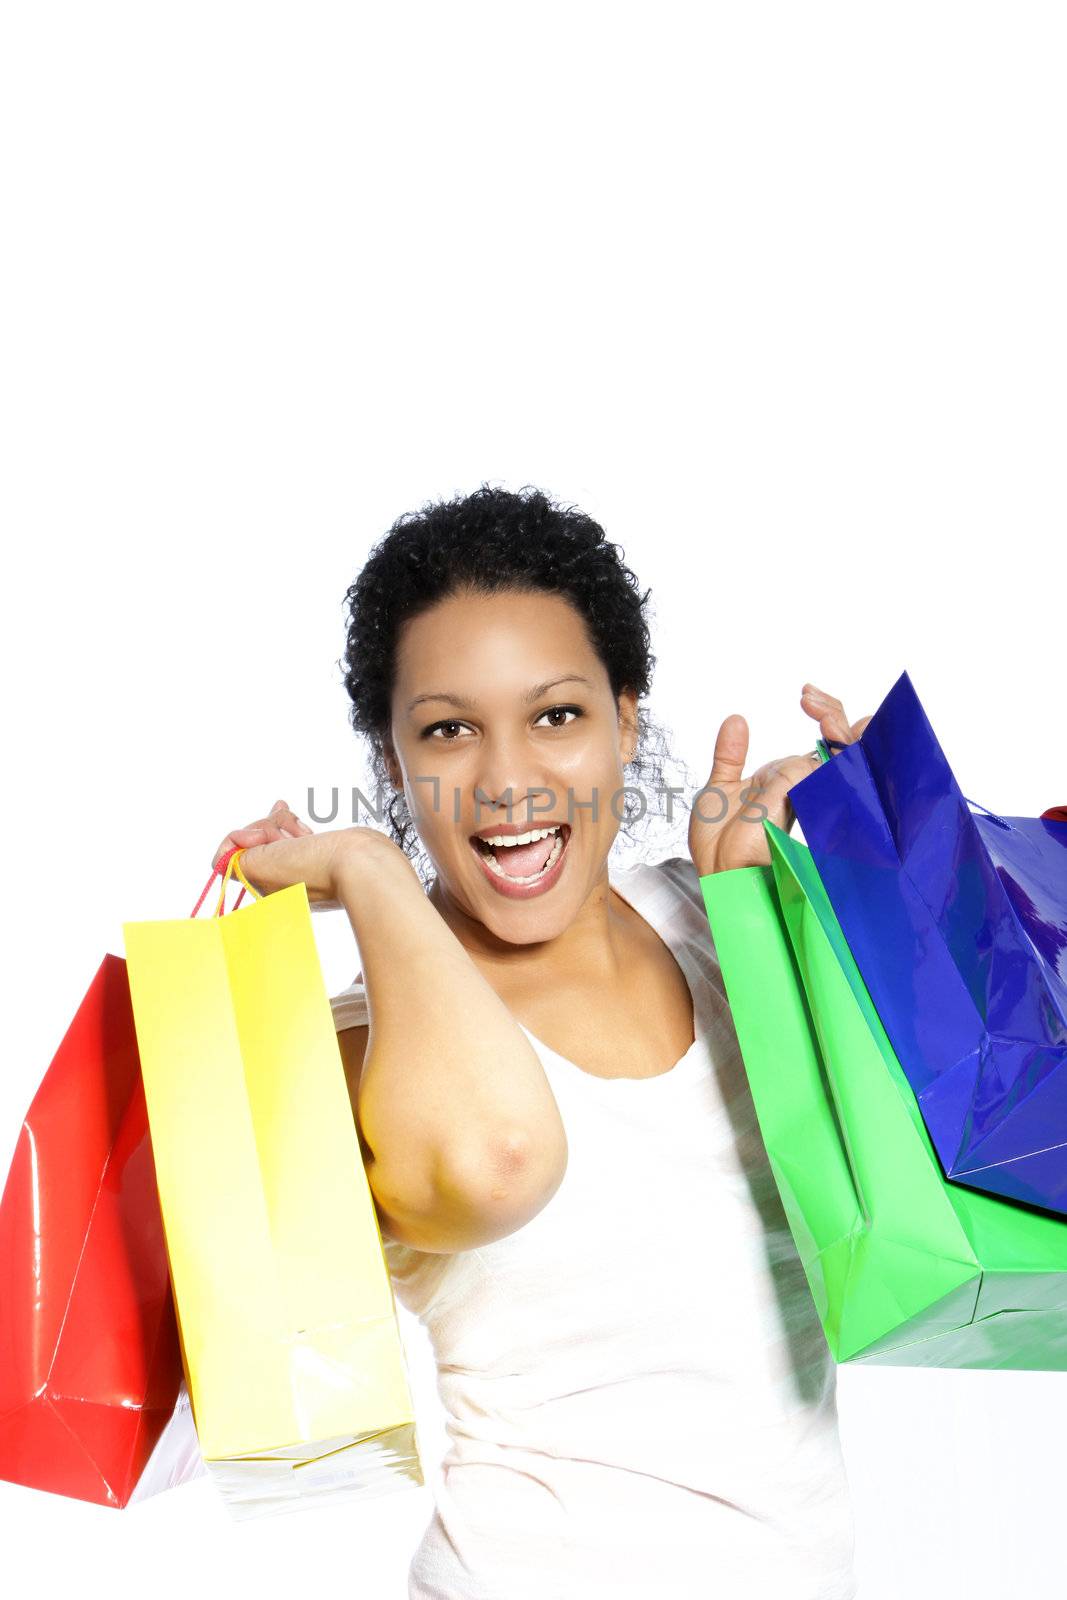 Laughing woman with colourful shopping bags by Farina6000